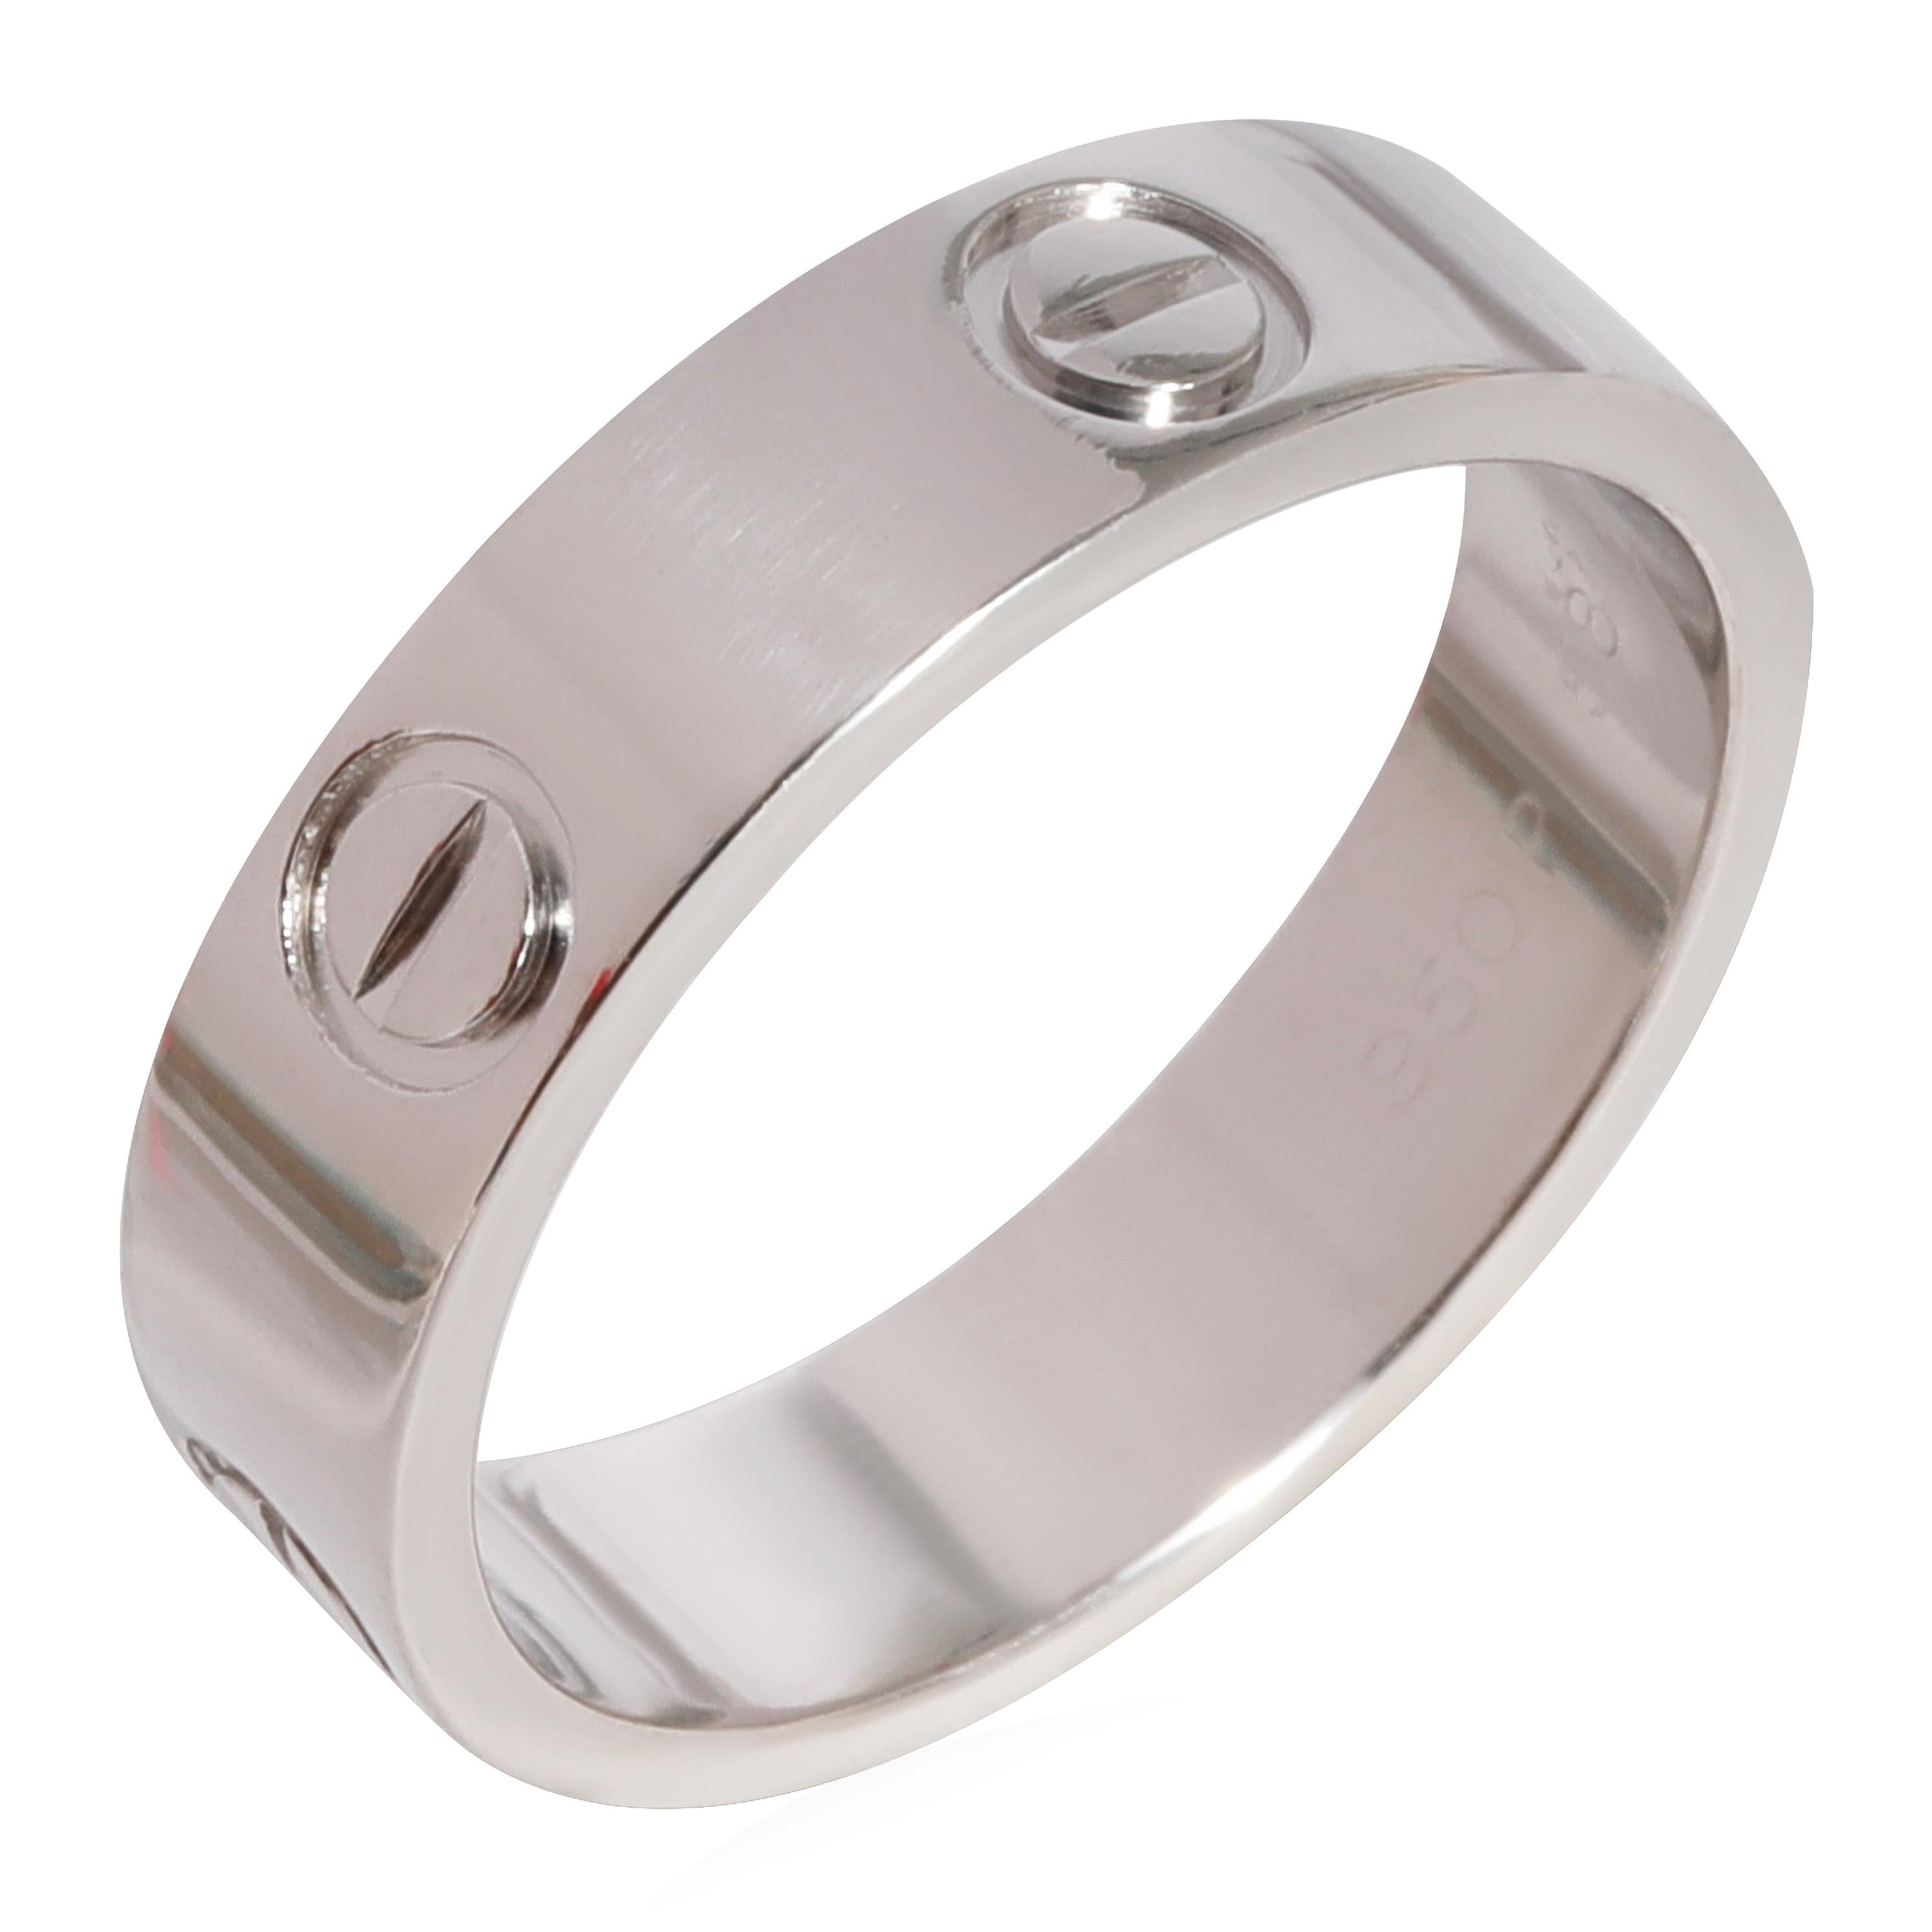 Cartier Love Ring in 950 Platinum

PRIMARY DETAILS
SKU: 123629
Listing Title: Cartier Love Ring in 950 Platinum
Condition Description: Retails for 4000 USD. In excellent condition and recently polished. Ring size is 8.25. Comes with Box.
Brand: